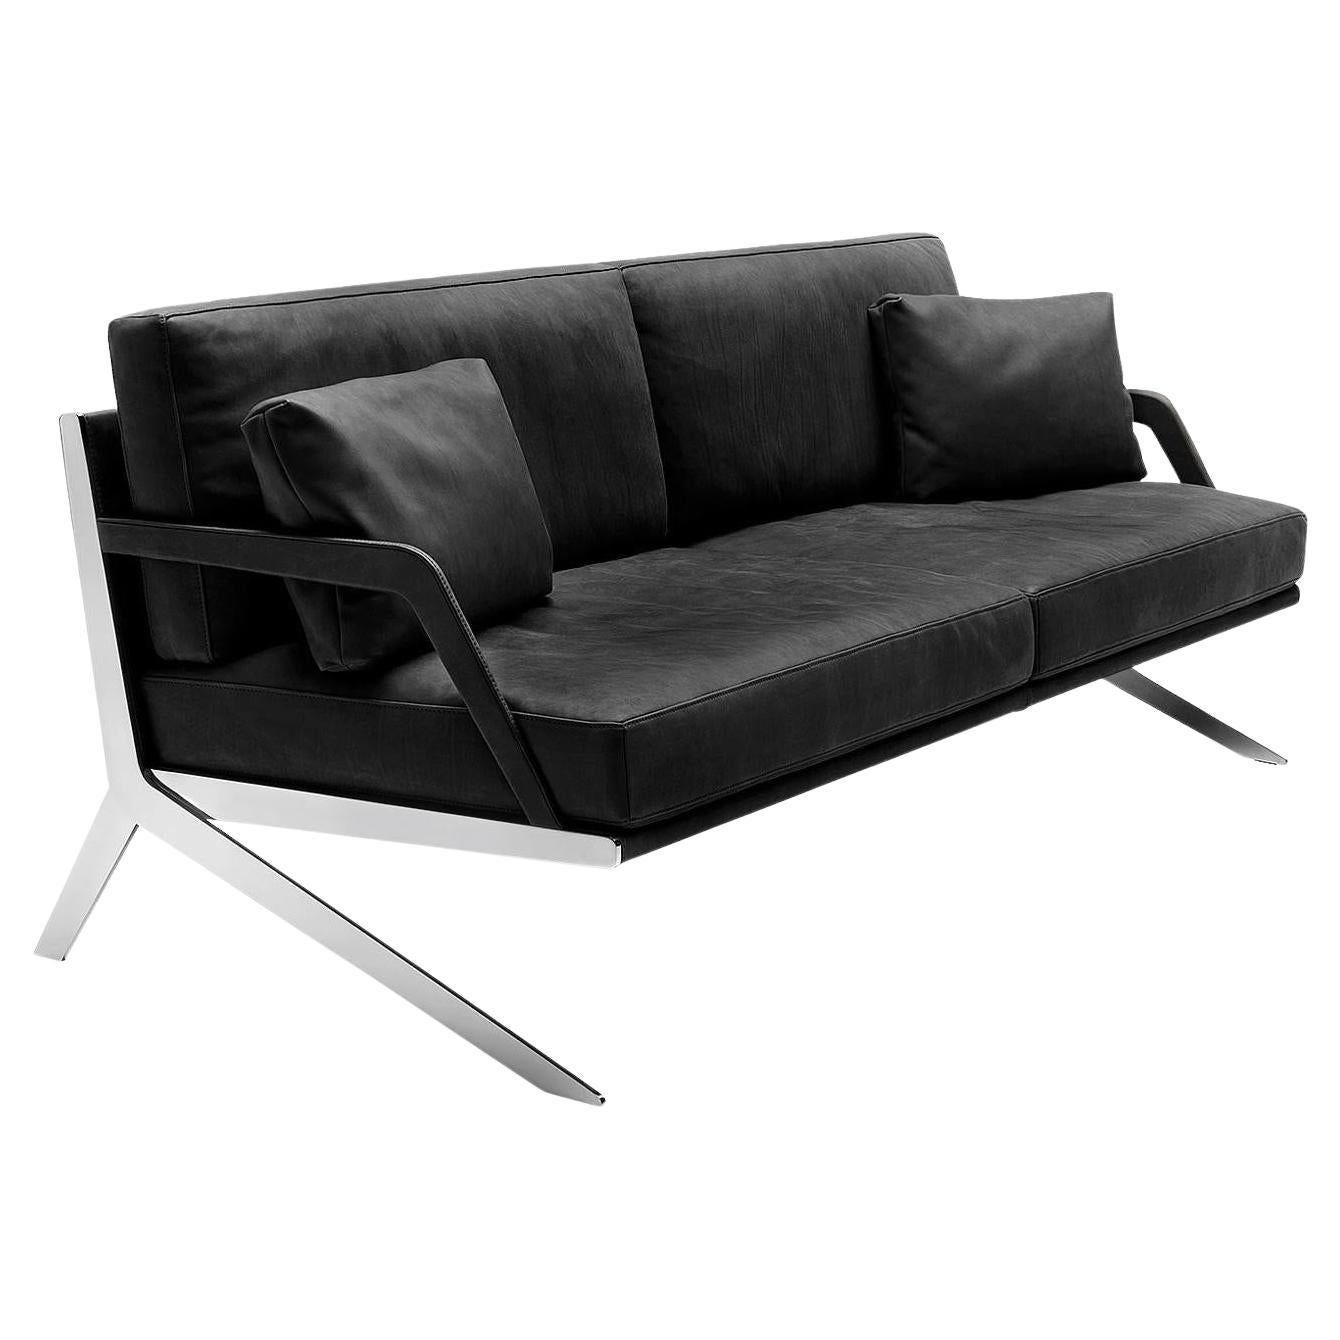 De Sede DS-60/23 Sofa in Black Leather Upholstery by Gordon Guillaumier For Sale